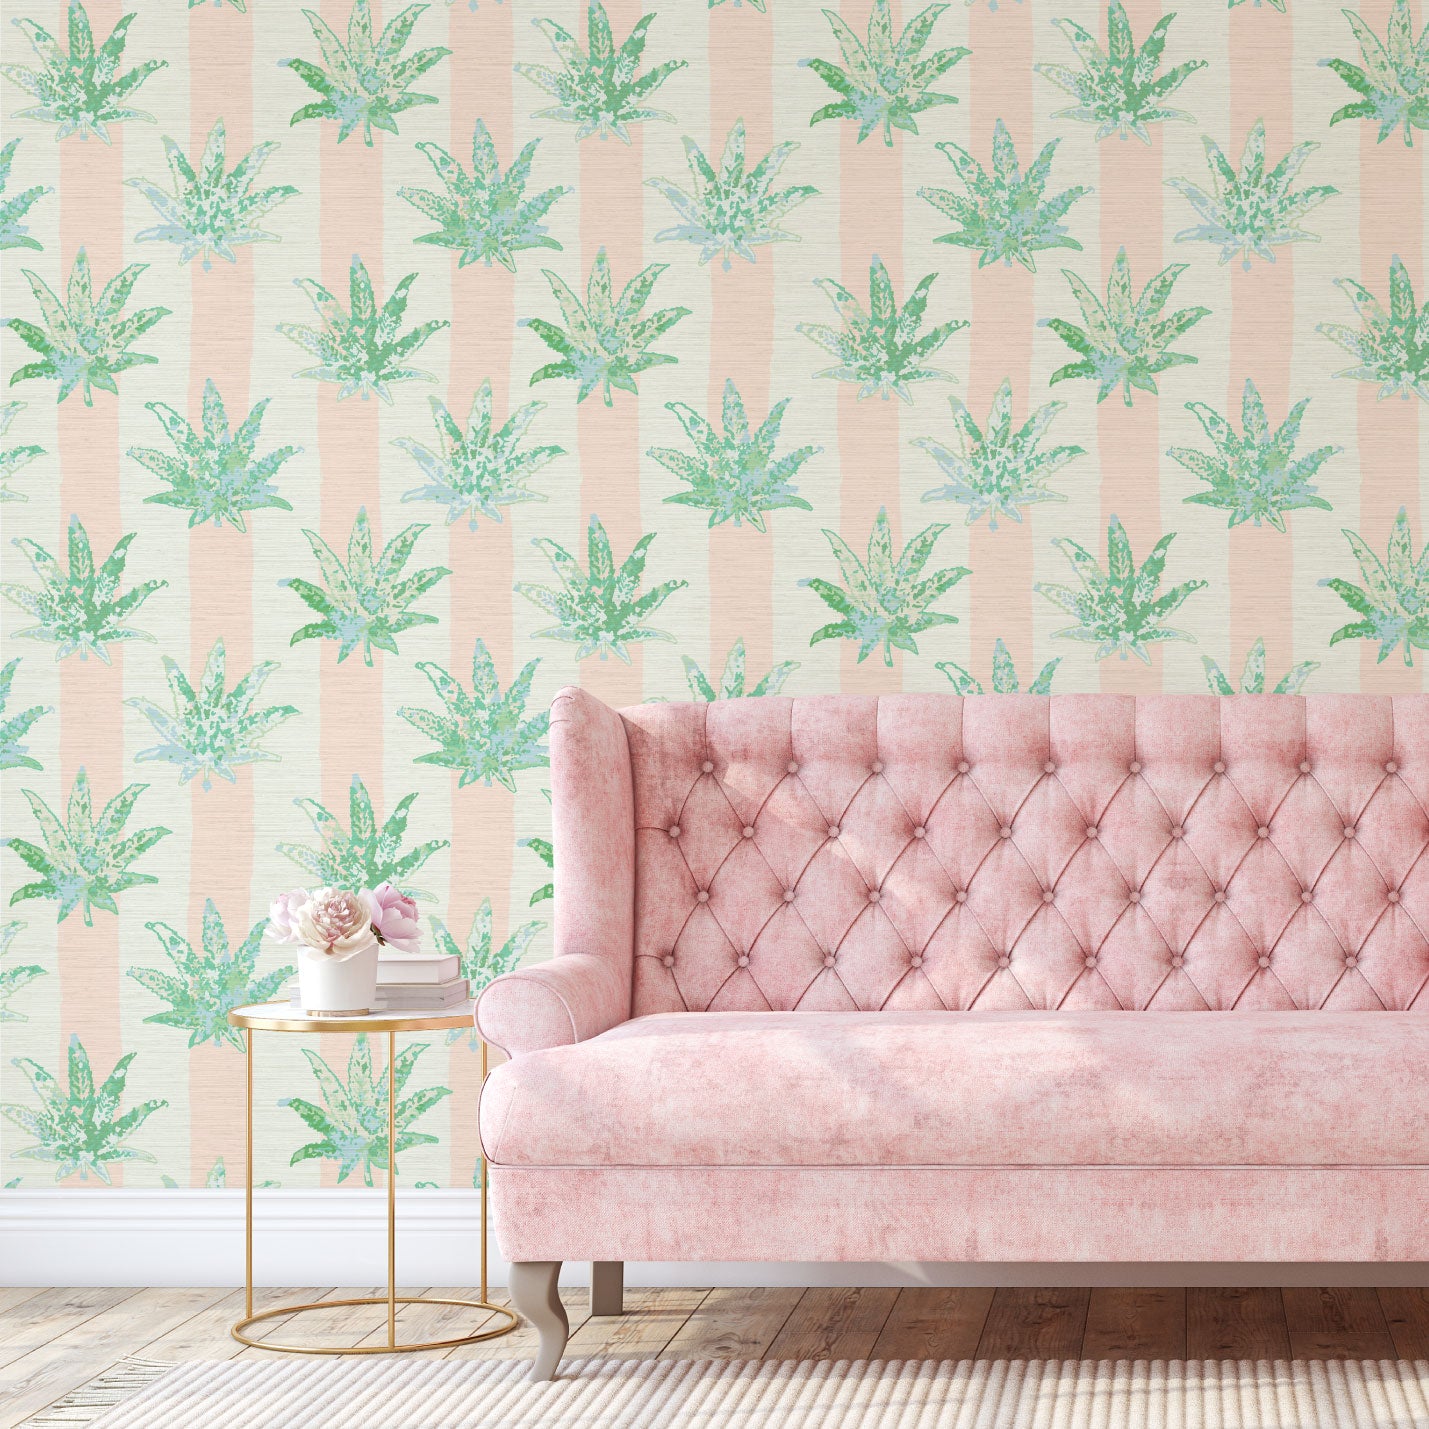 printed textured natural grasscloth wallpaper wall covering eco-friendly sustainable wide vertical stripes painted pink light pink baby pink weed marijuana high-quality tailor-made custom designed interior design bold vacation seaside coastal waterfront retreat relaxed beach cottage living room entrance